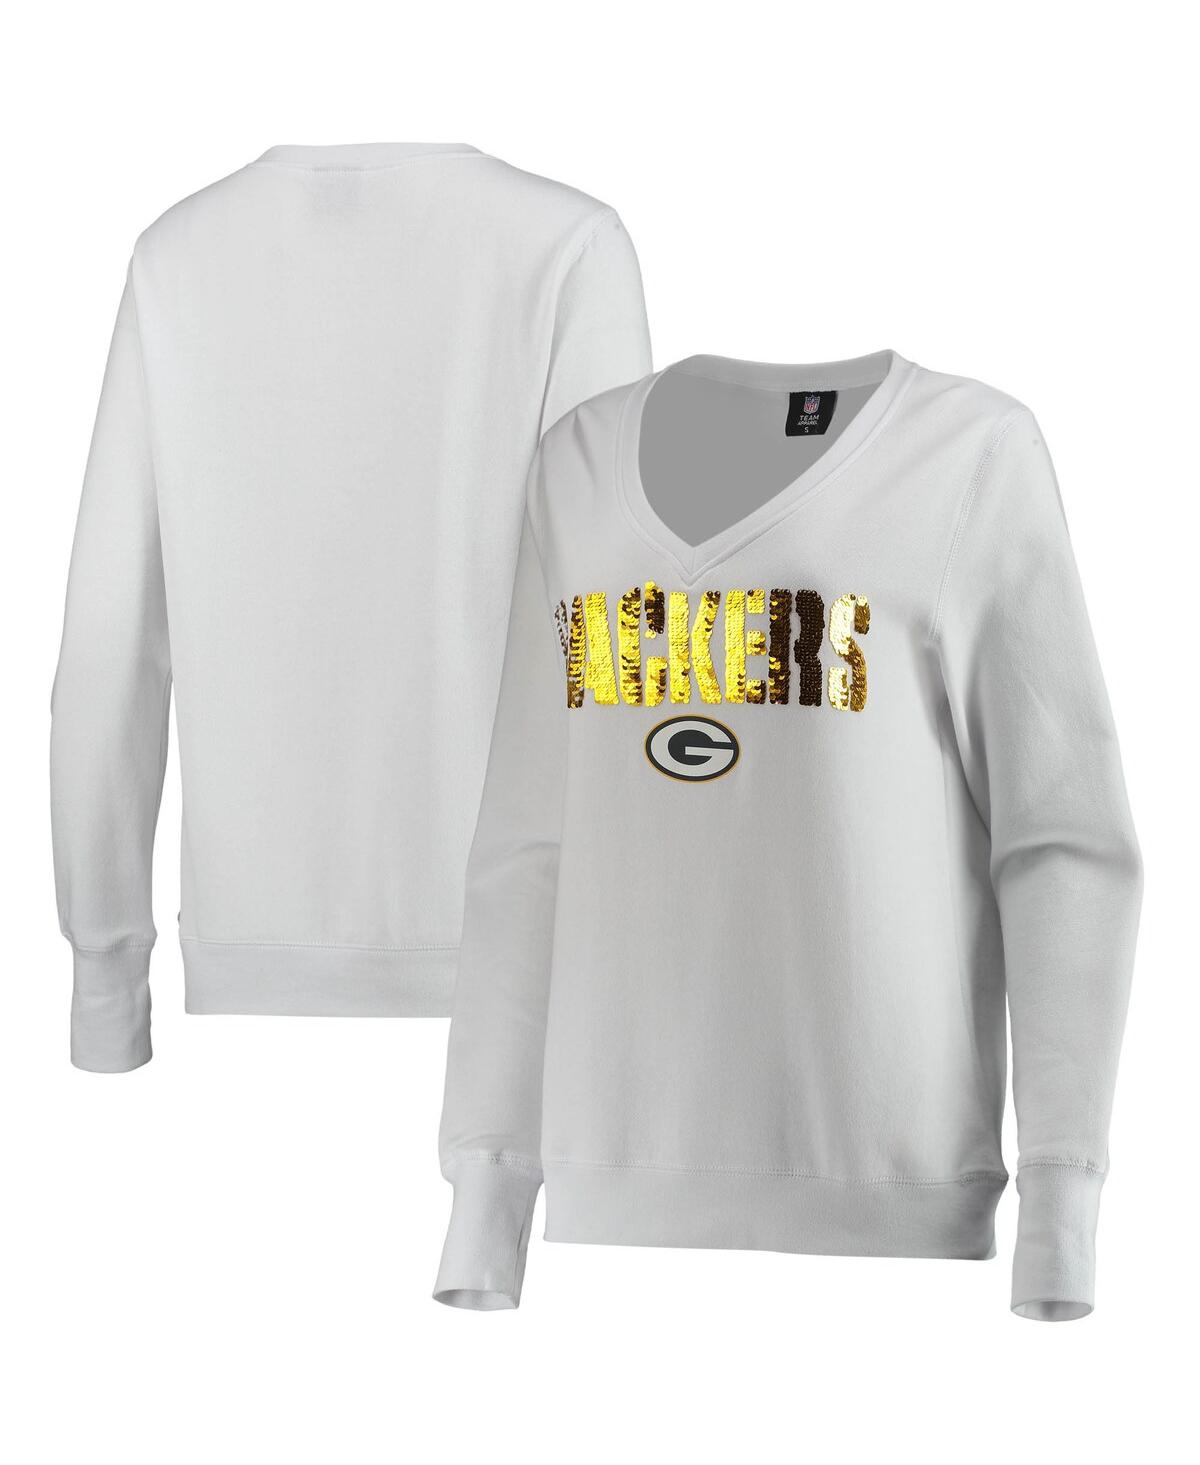 Women's Cuce White Green Bay Packers Victory V-Neck Pullover Sweatshirt - White